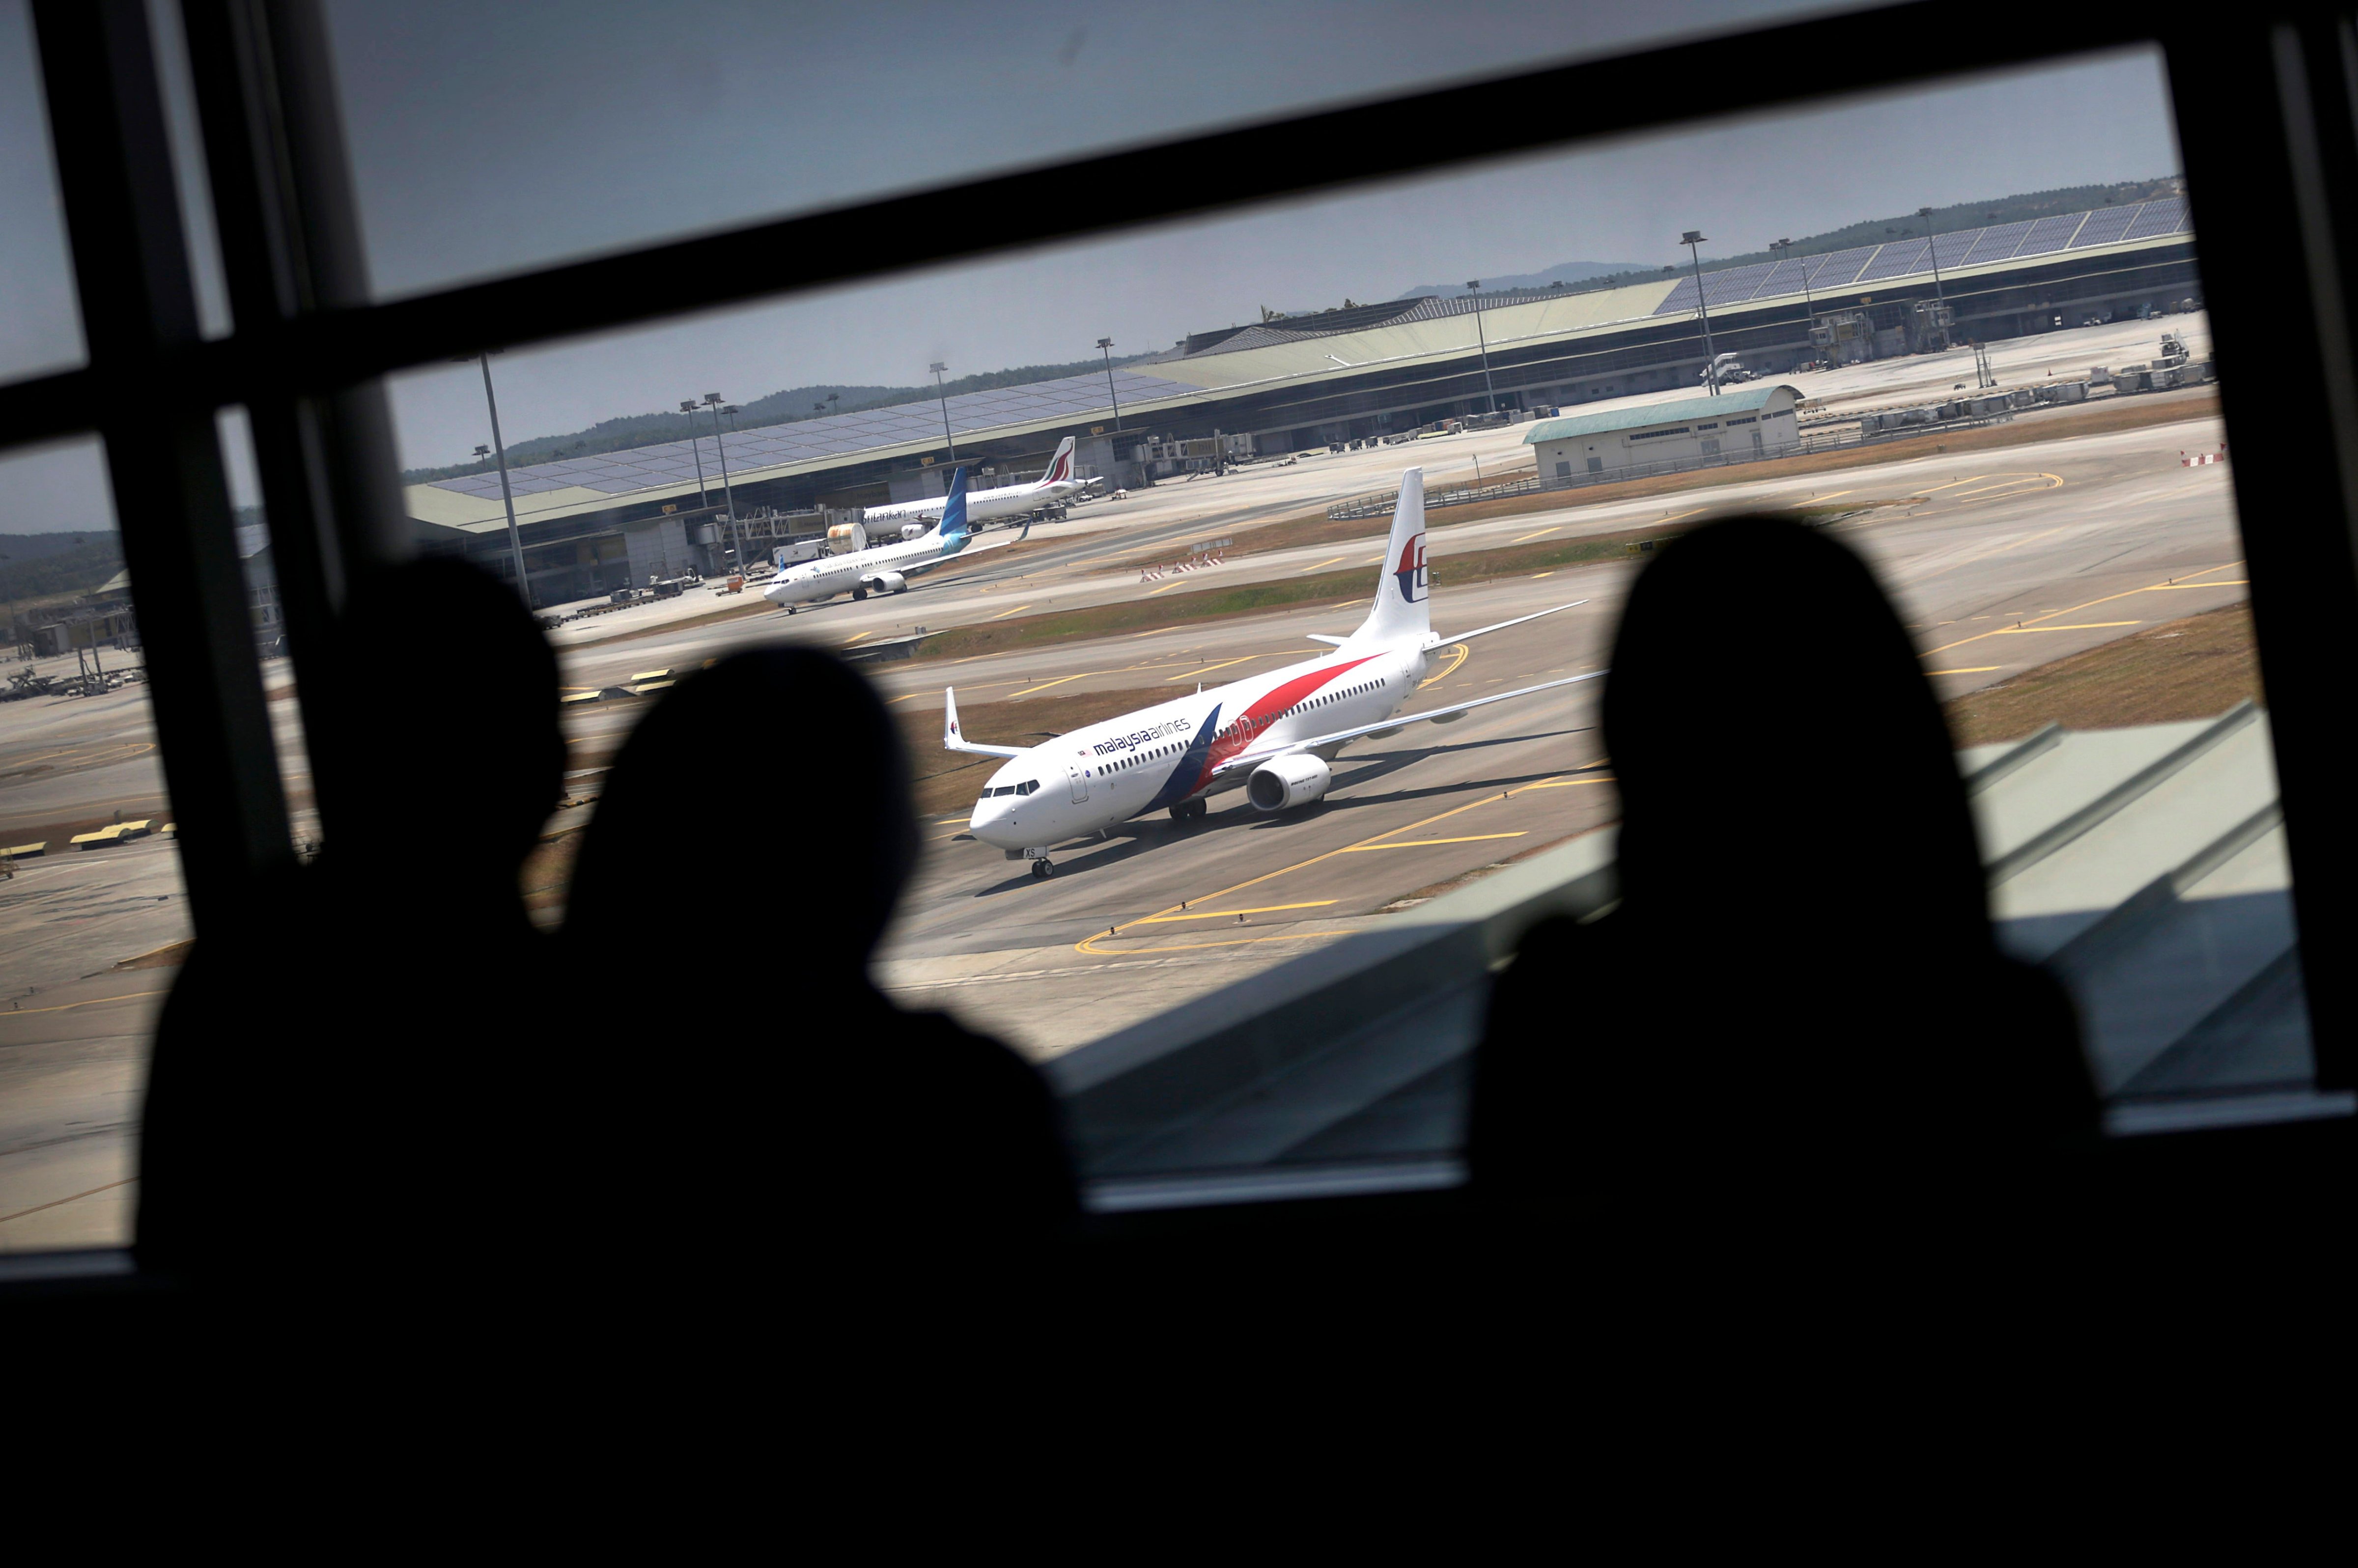 Women are silhouetted as they watch a Malaysia Airlines jet taxi on the tarmac at the Kuala Lumpur International Airport, March 11, 2014, in Sepang, Malaysia. (Wong Maye-E—AP)